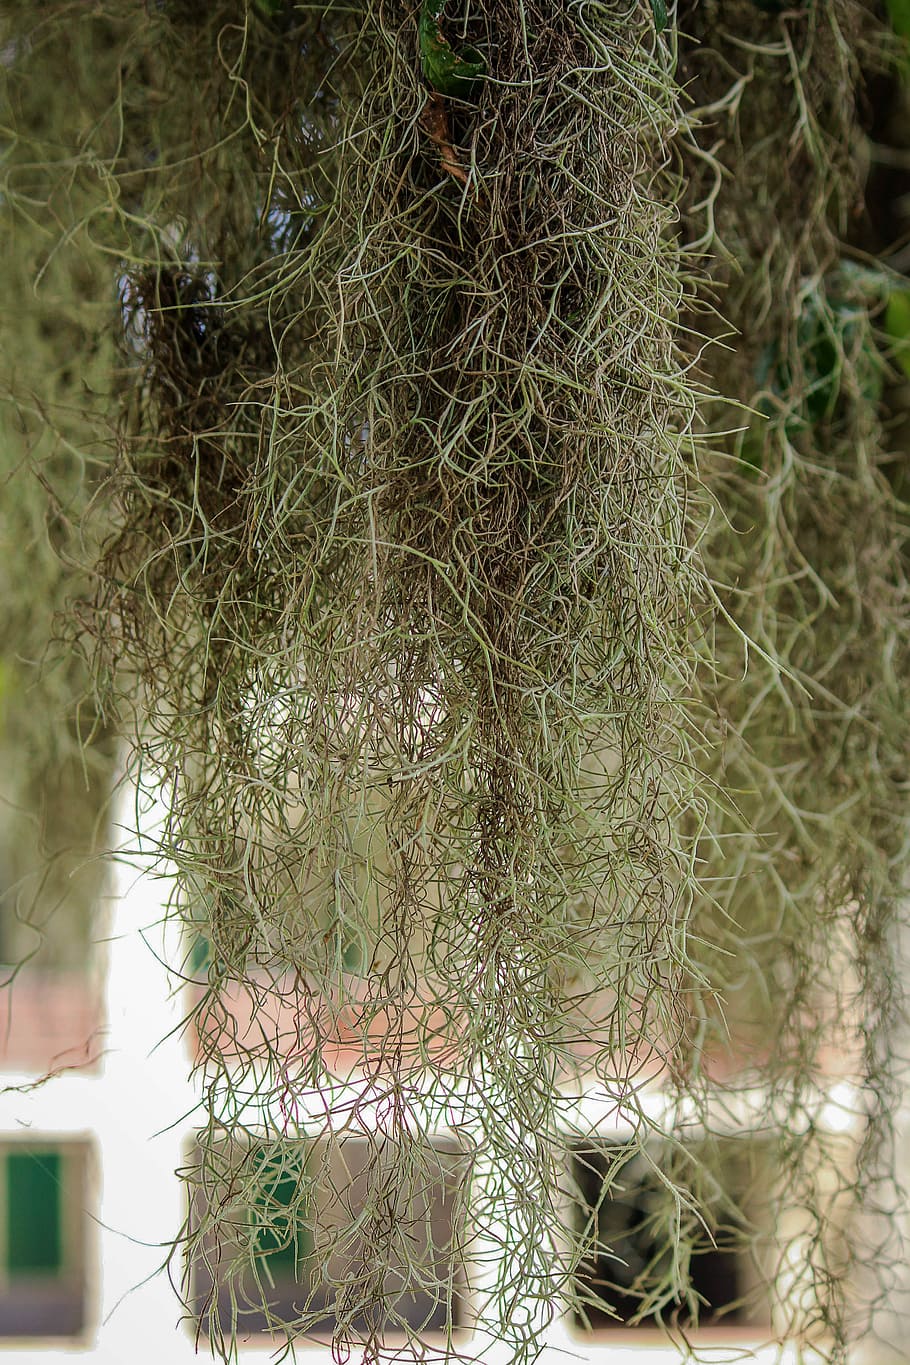 Spanish Moss, Draping, hanging moss, draping moss, epiphyte, air plant, tillandsia usneoides, animal themes, close-up, focus on foreground